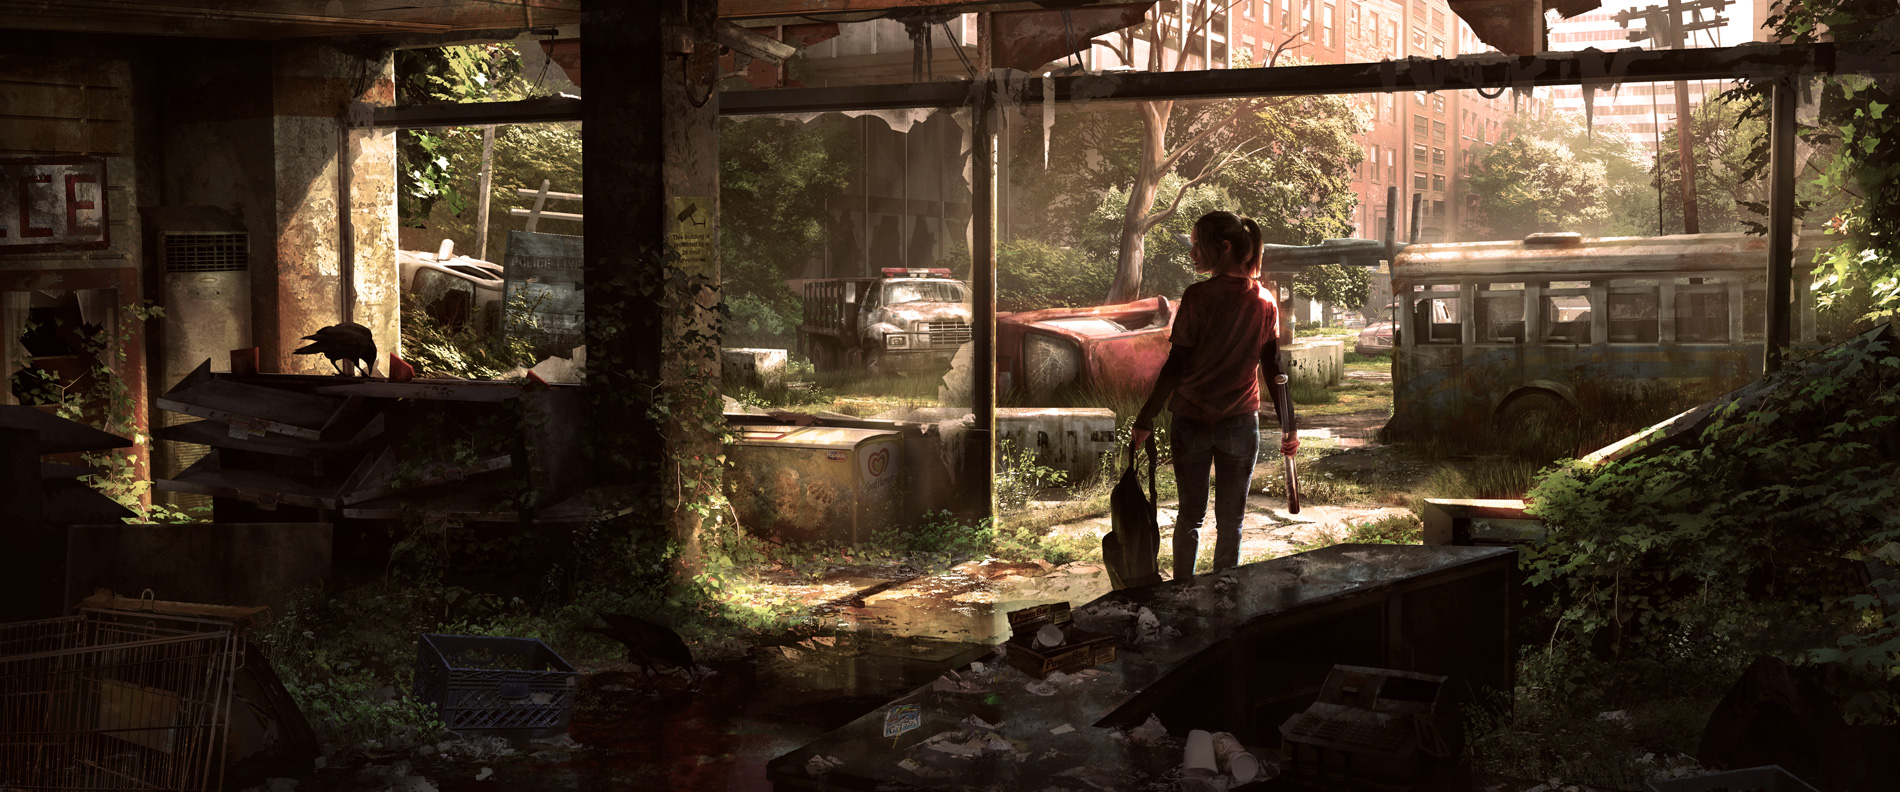 Background wallpaper of the last of us scenery